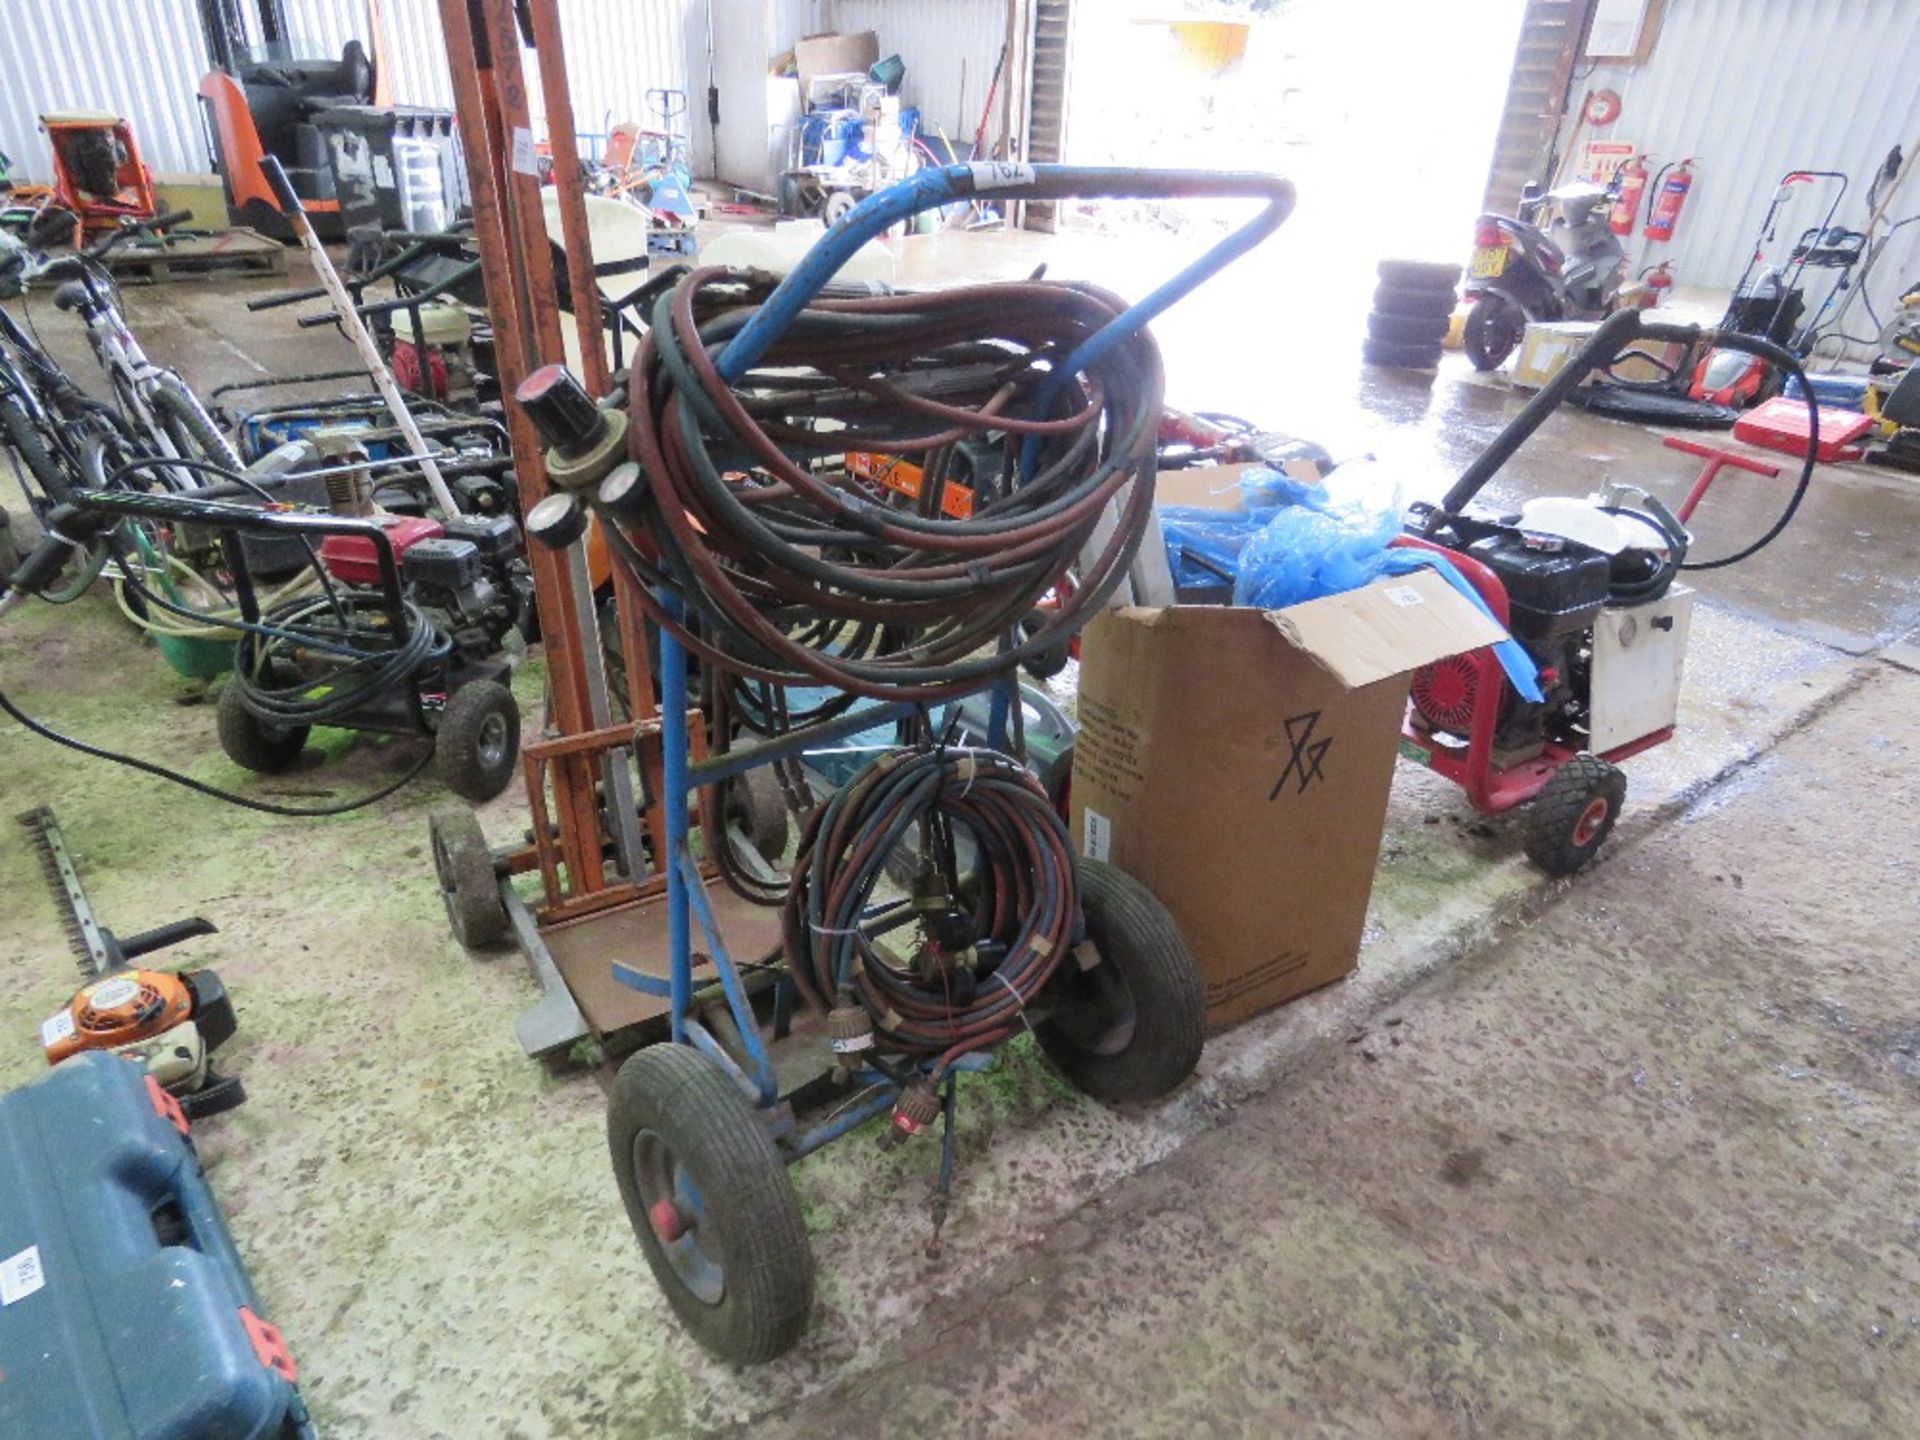 2 X SETS OF OXY-ACETELENE GAS HOSES PLUS A BARROW.....THIS LOT IS SOLD UNDER THE AUCTIONEERS MARGIN